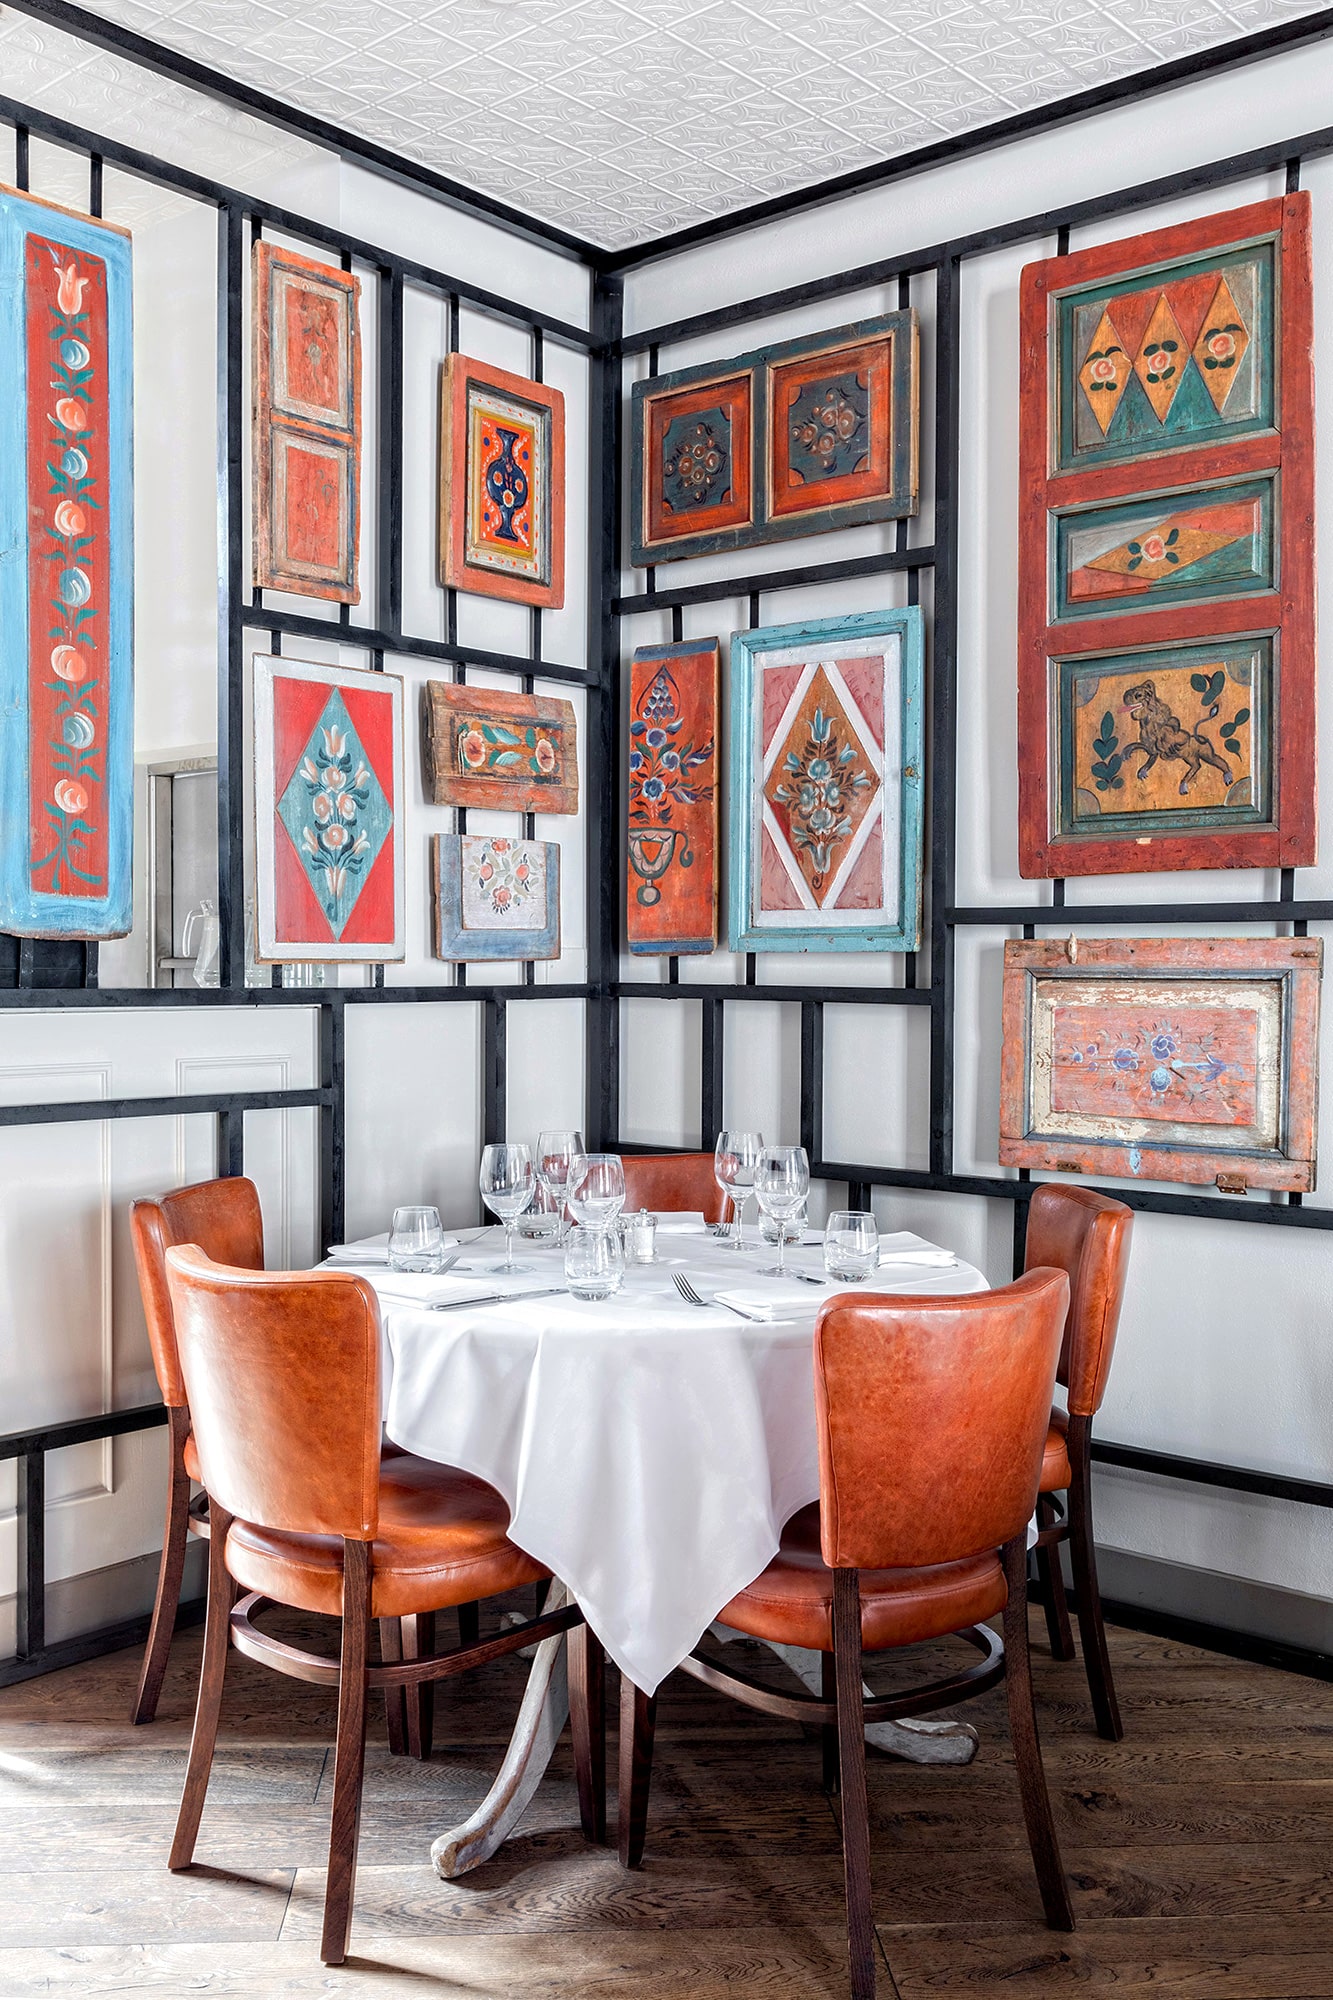 Interior photo of a Russian restaurant: orange leather chairs; tables with white cloths; traditional old Russian decor on the wall; view from the room to the outside patio